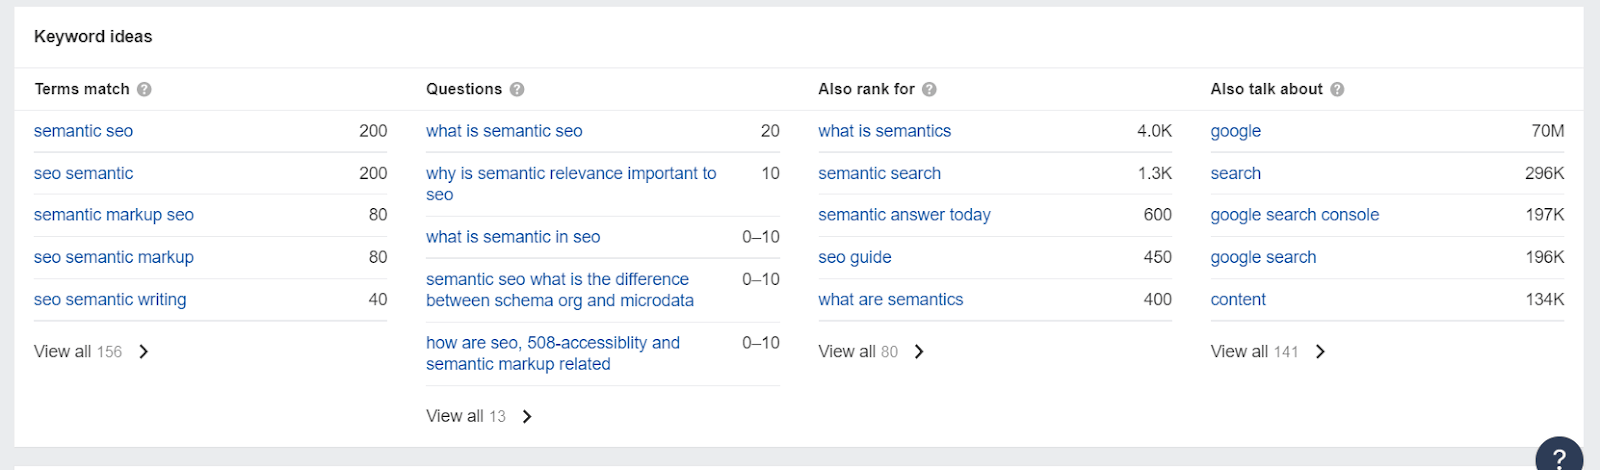 Research for additional keywords using suggestions in keyword tools